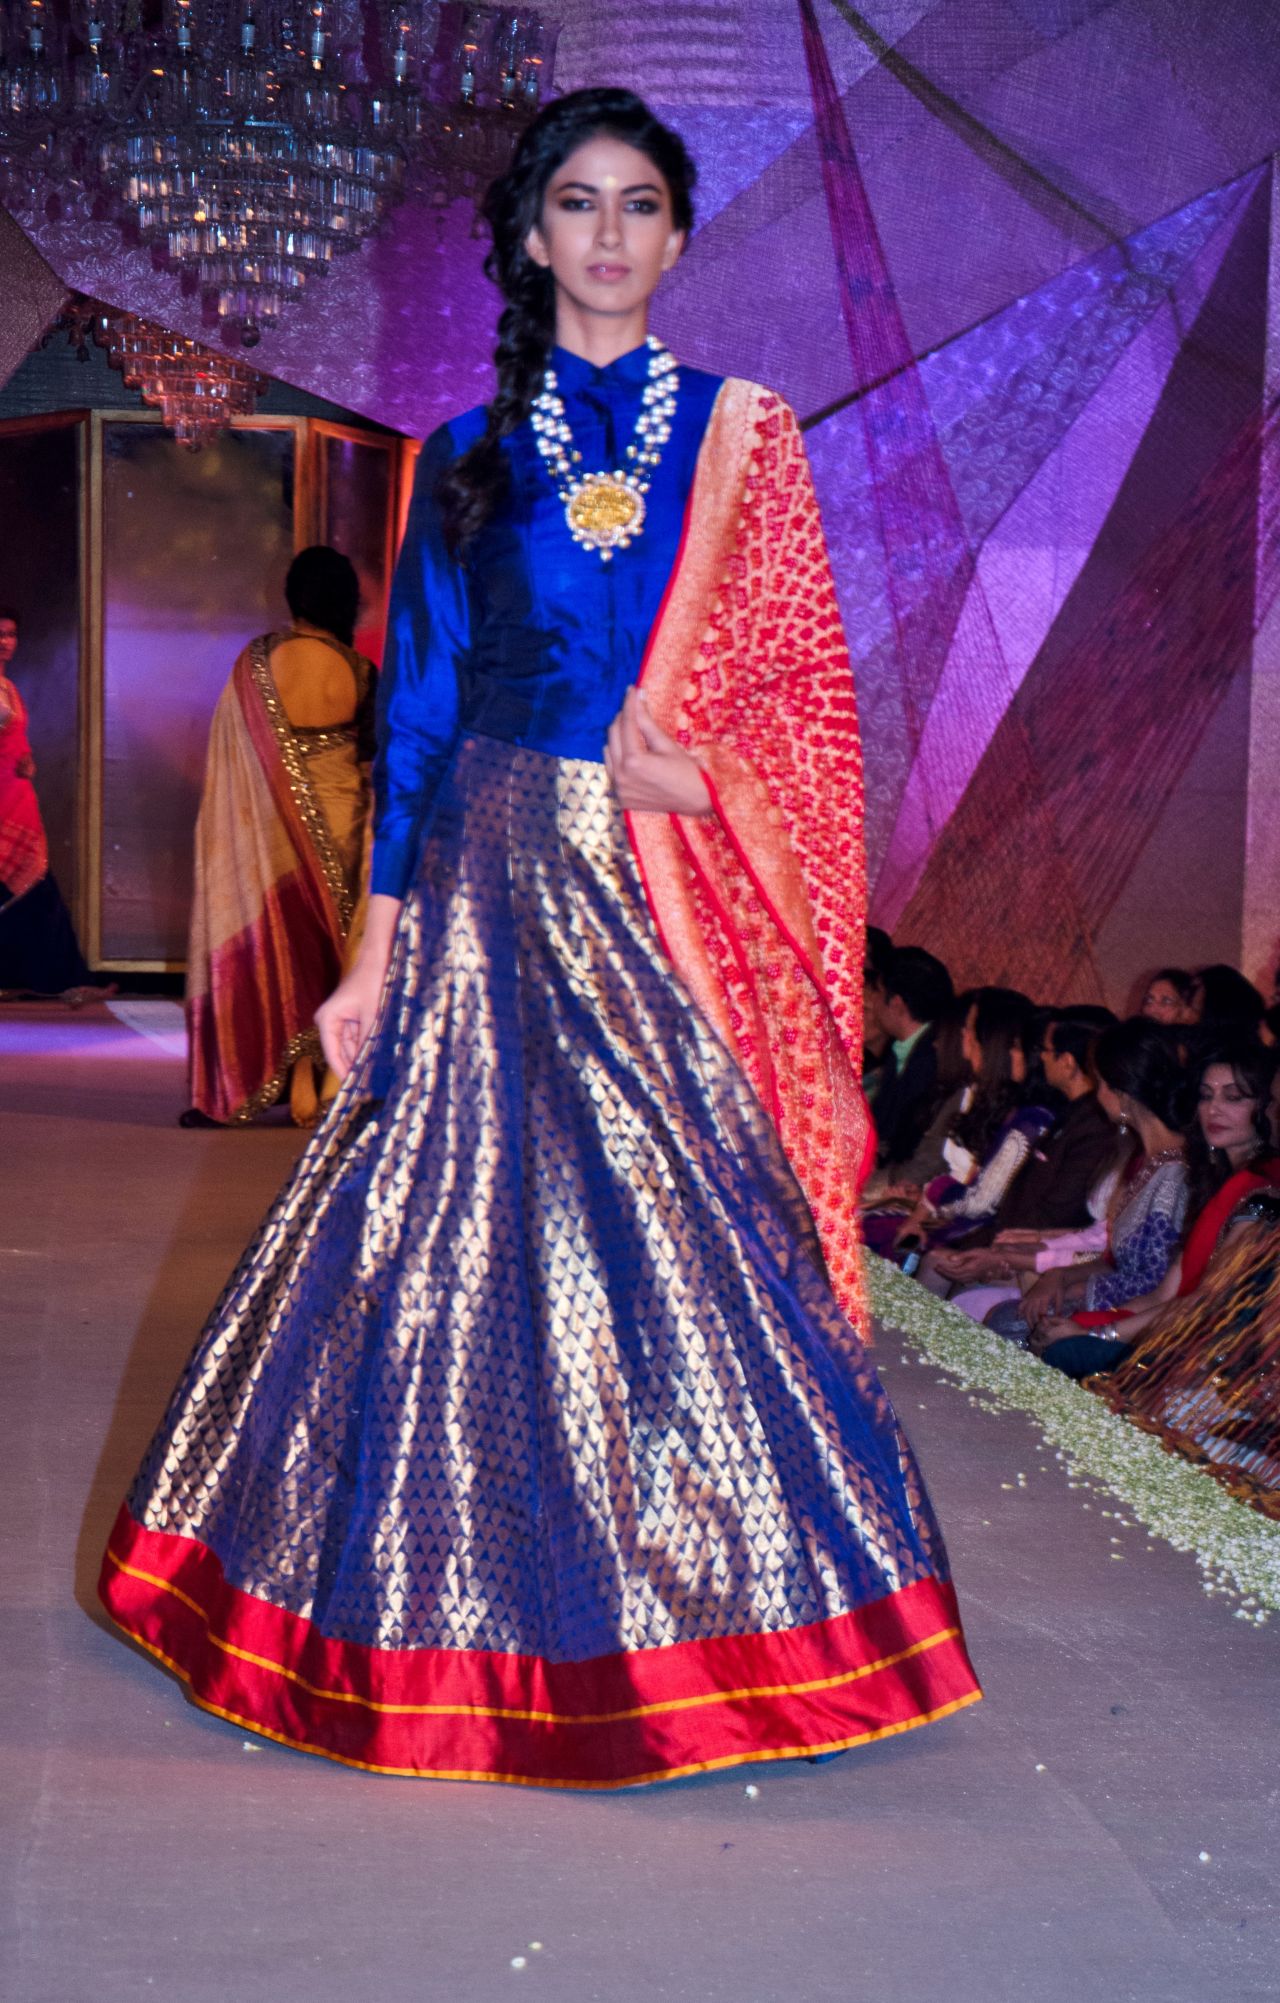 Vibrant colors are a signature of the Indian sari - here it's the form that has been updated.